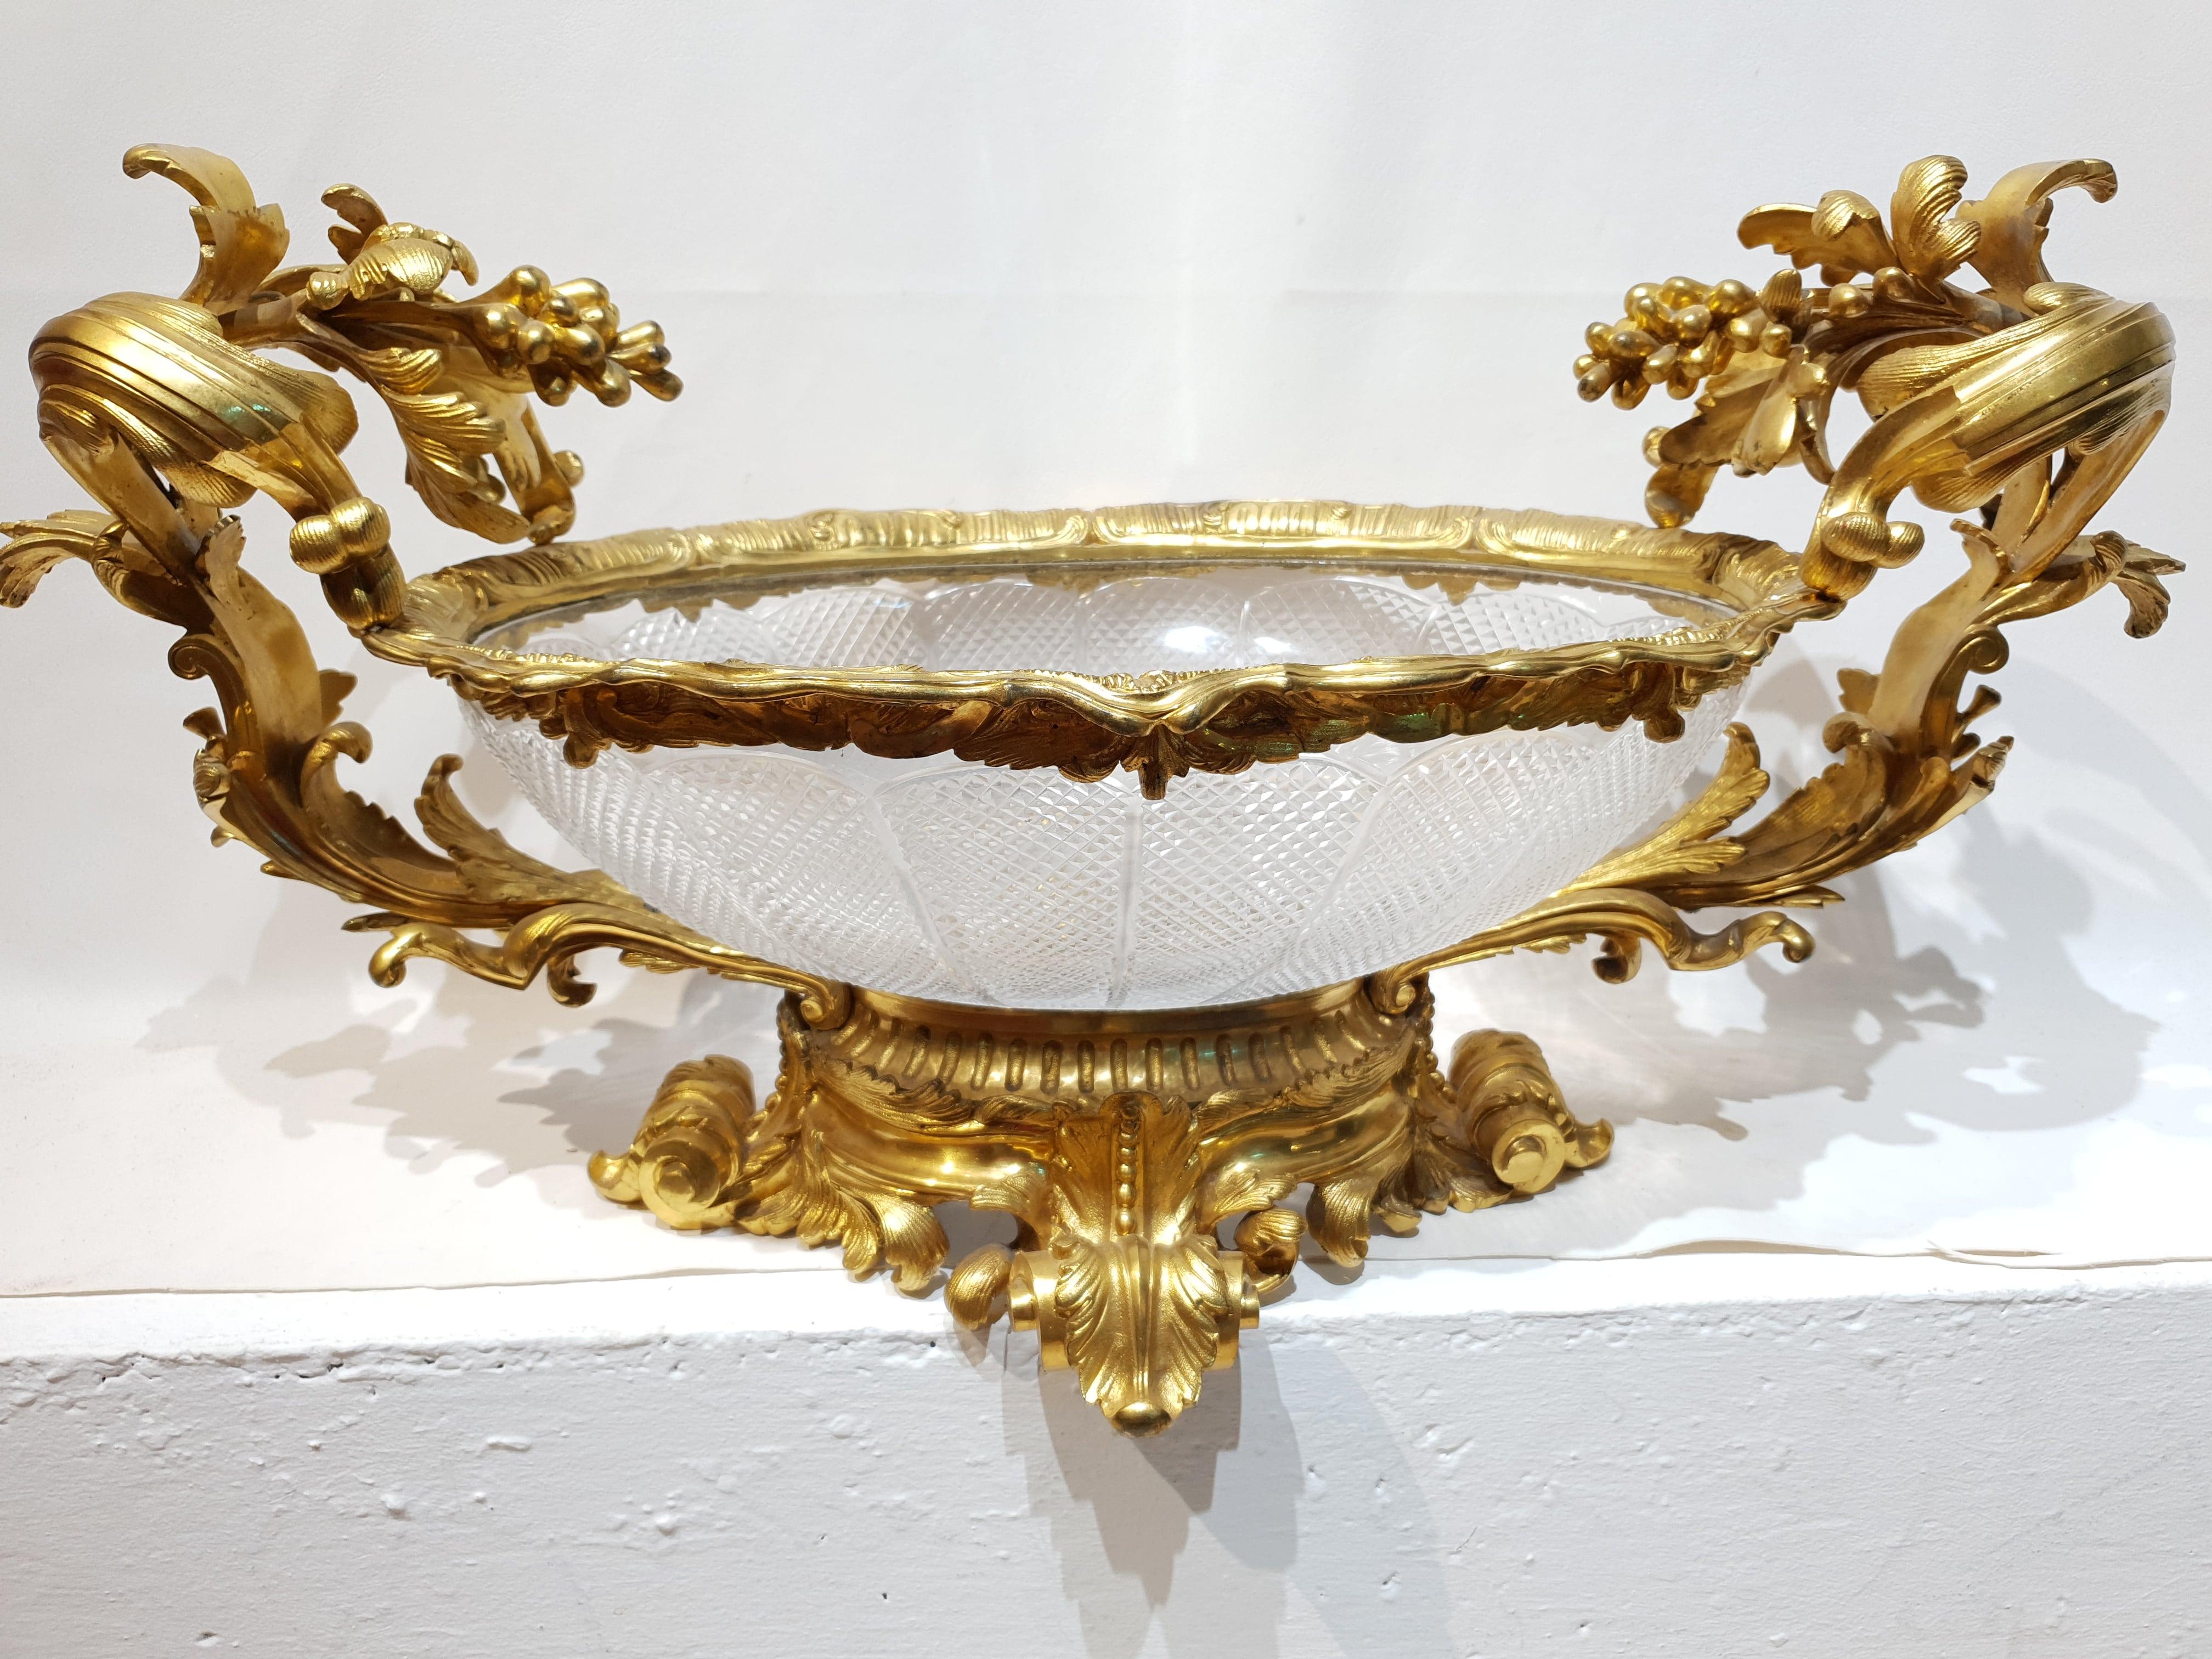 This mid 19th century centrepiece was crafted by the Baccarat French company and is wrought from crystal and ormolu. Ormolu adorns the rim of the bowl and at each sides the handles are in the form of scrolled leaves and grapes. The crystal body is